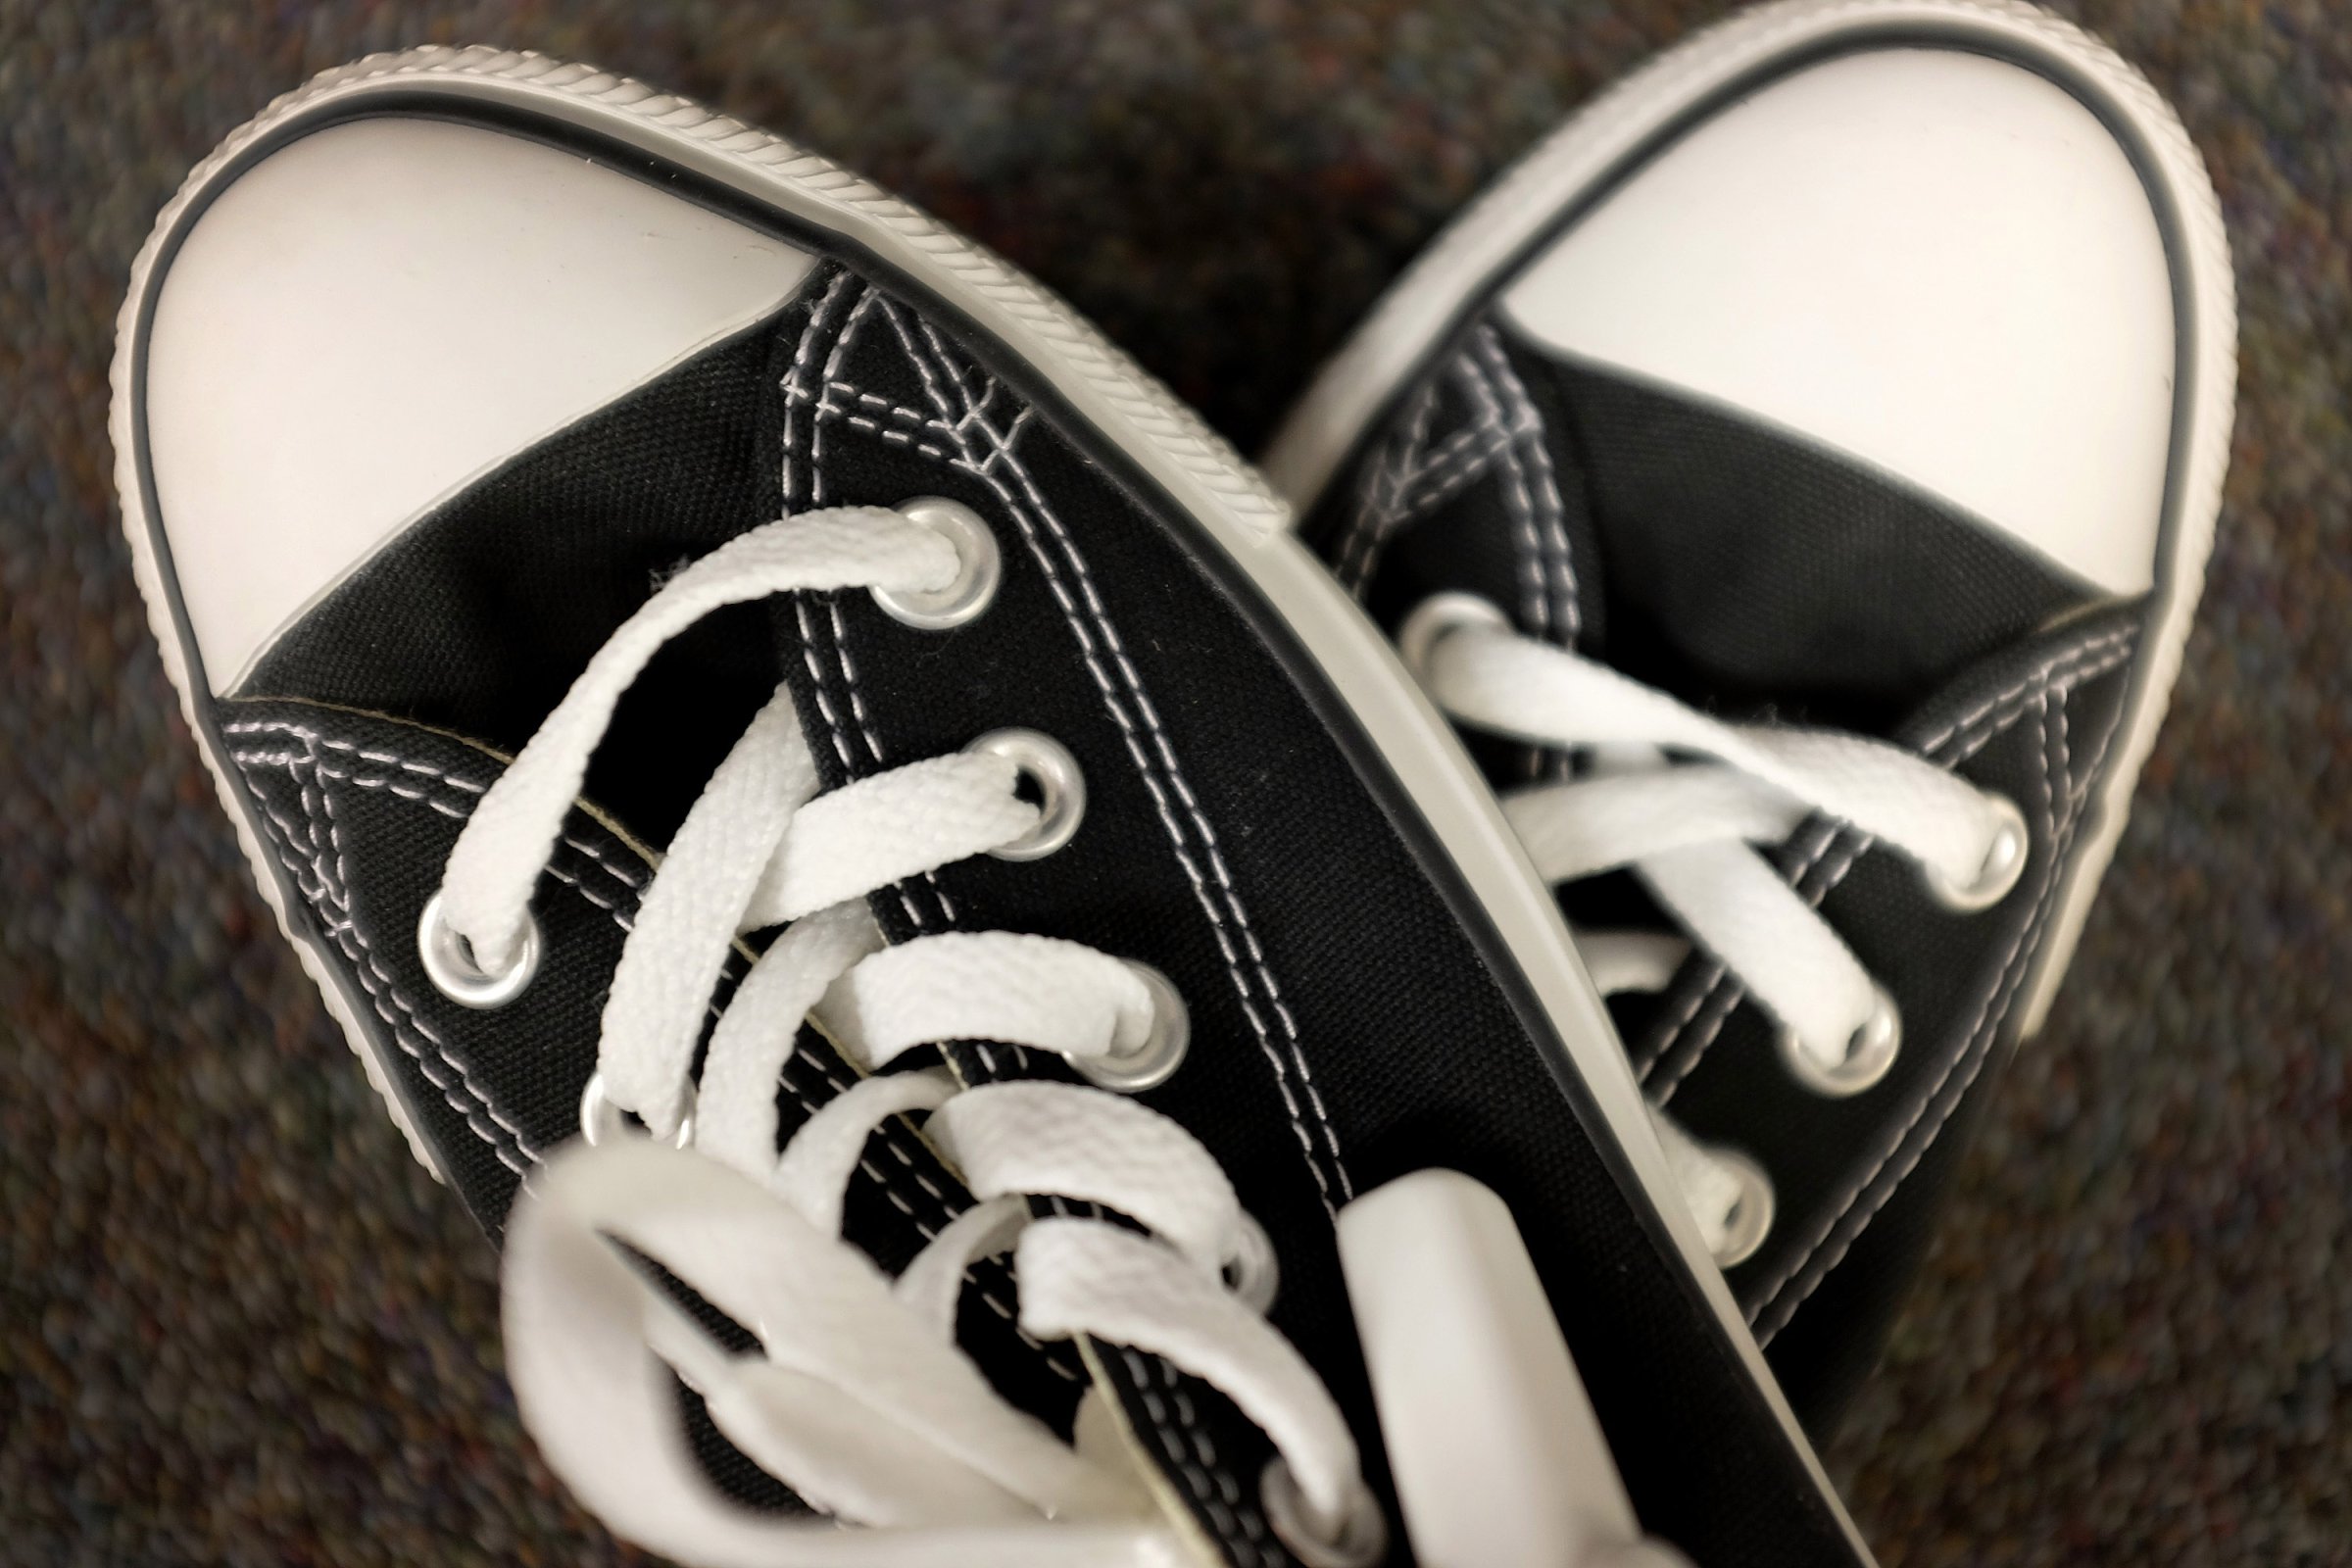 Converse Brings Lawsuit To Competitors Over Its Classic Chuck Taylor Shoes